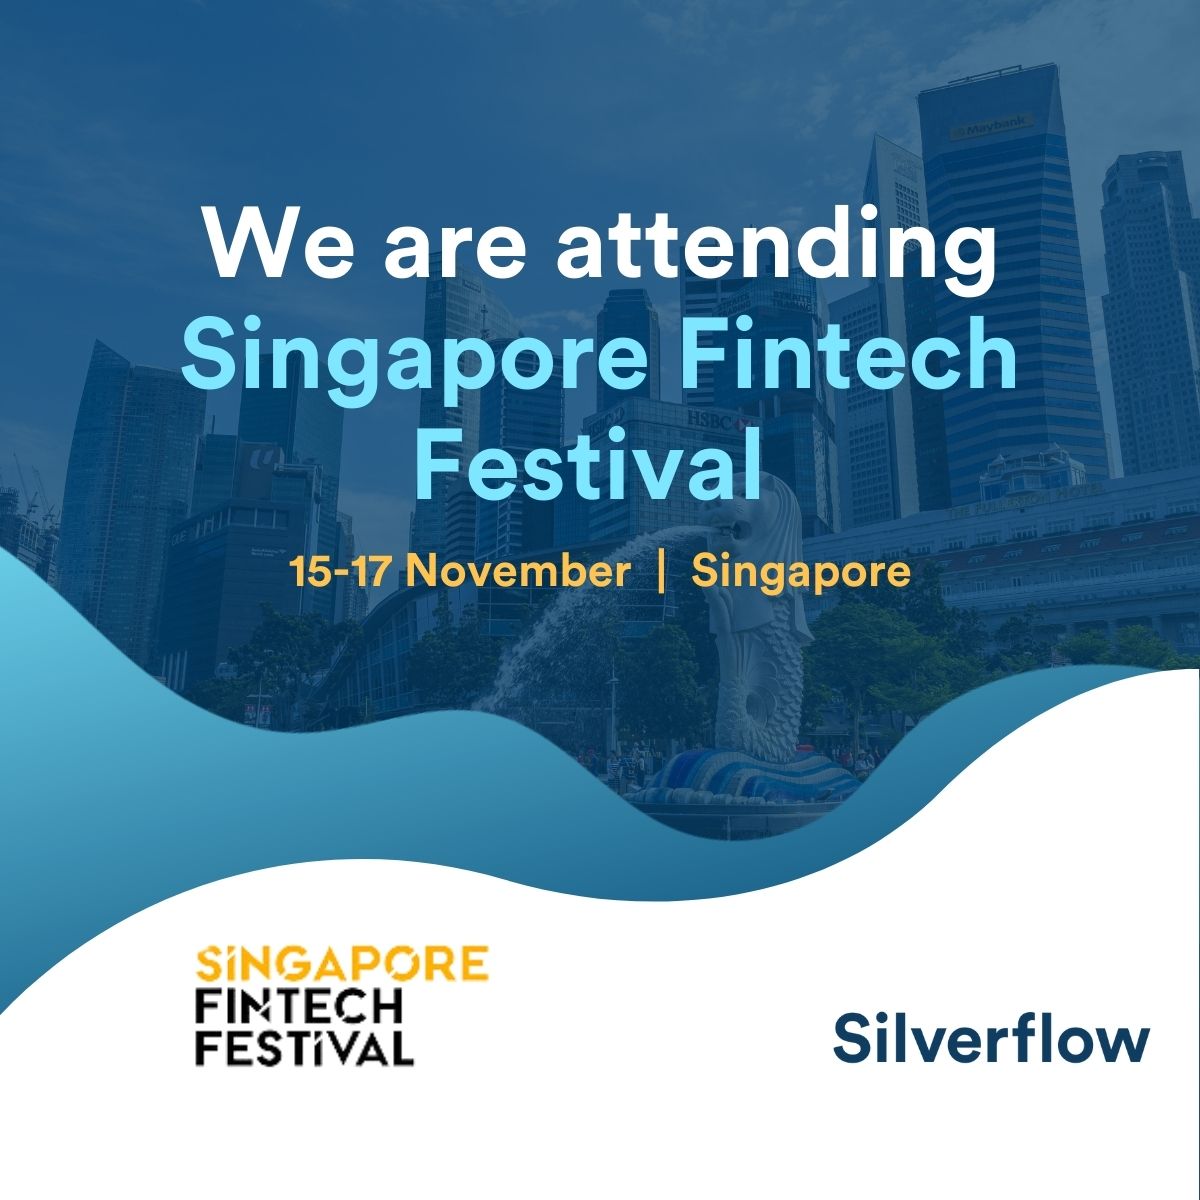 Silverflow is attending Singapore Fintech Festival this November! Check out this event here: eu1.hubs.ly/H05spXj0 

#singaporefintechfestival #fintech #singapore #Payments #silverflow